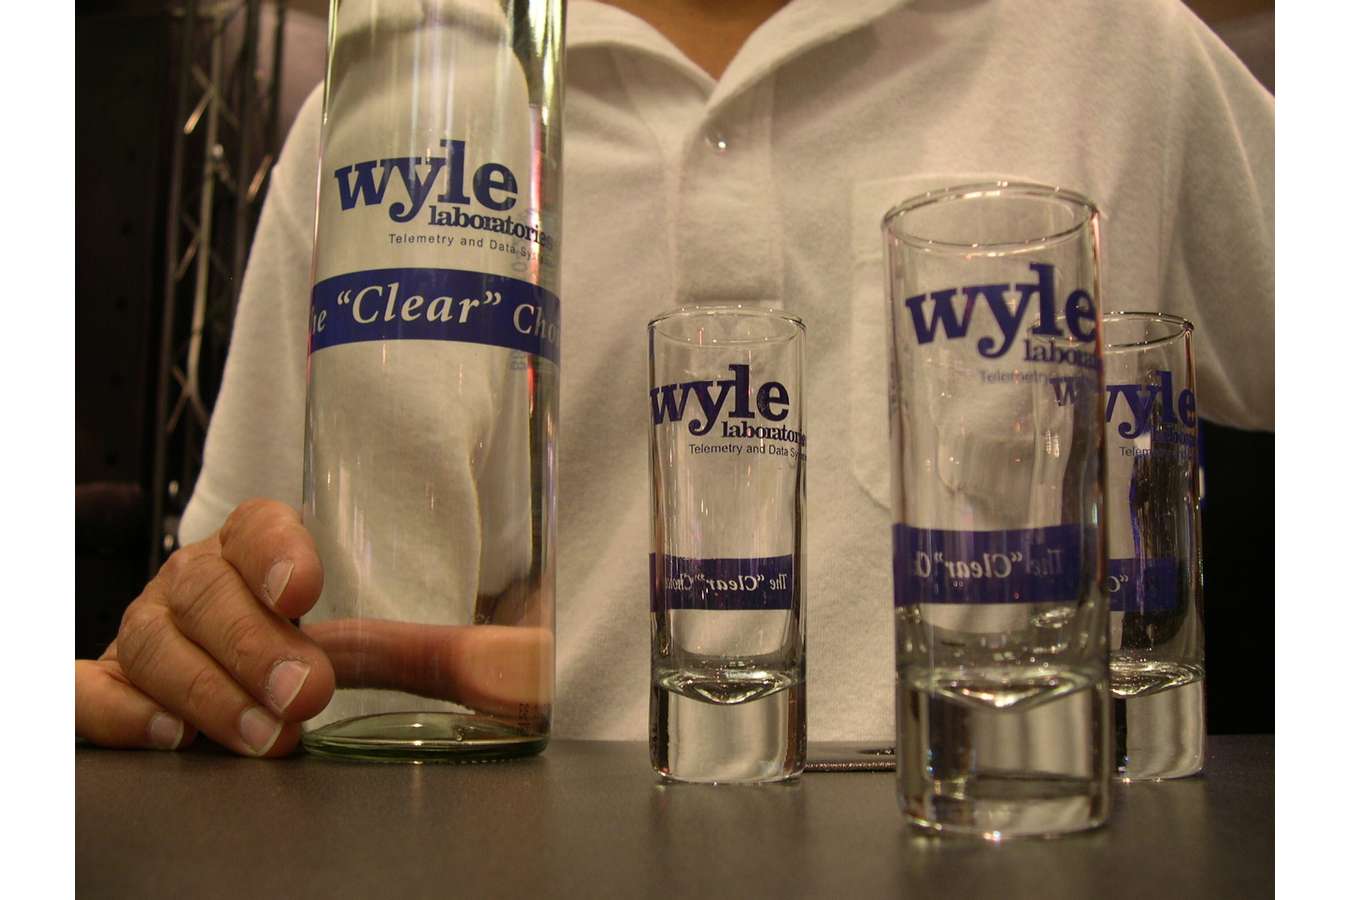 Wyle Water : Wyle's "Clear Choice" campaign branded water & shot  glasses